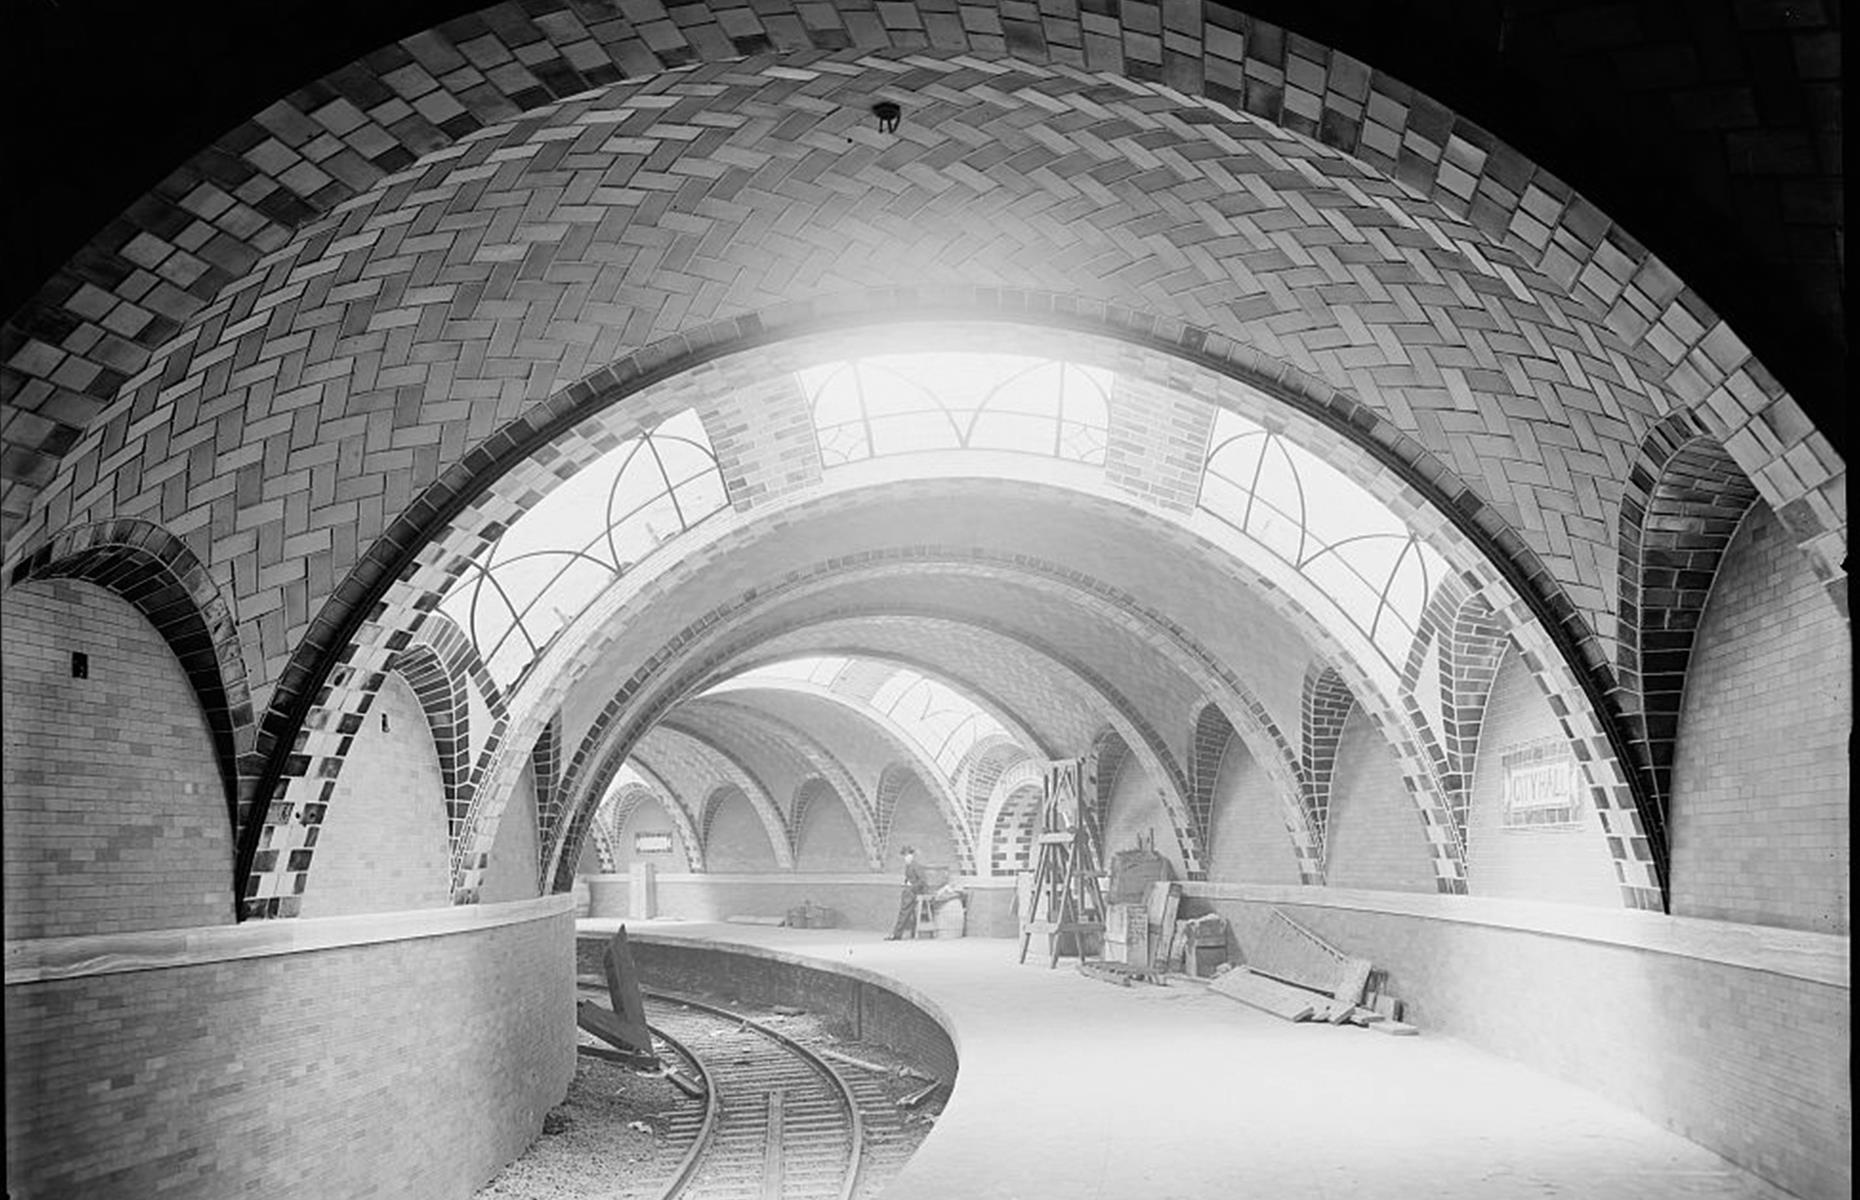 <p>Flash forward to the early 1900s and work on New York City's subway was well under way. City Hall, pictured here under construction, was part of the very first line, which ran 9.1 miles (14.6km) from here to 145th Street in Harlem.</p>  <p><strong><a href="http://bit.ly/3roL4wv">Love this? Follow our Facebook page for more travel inspiration</a></strong></p>